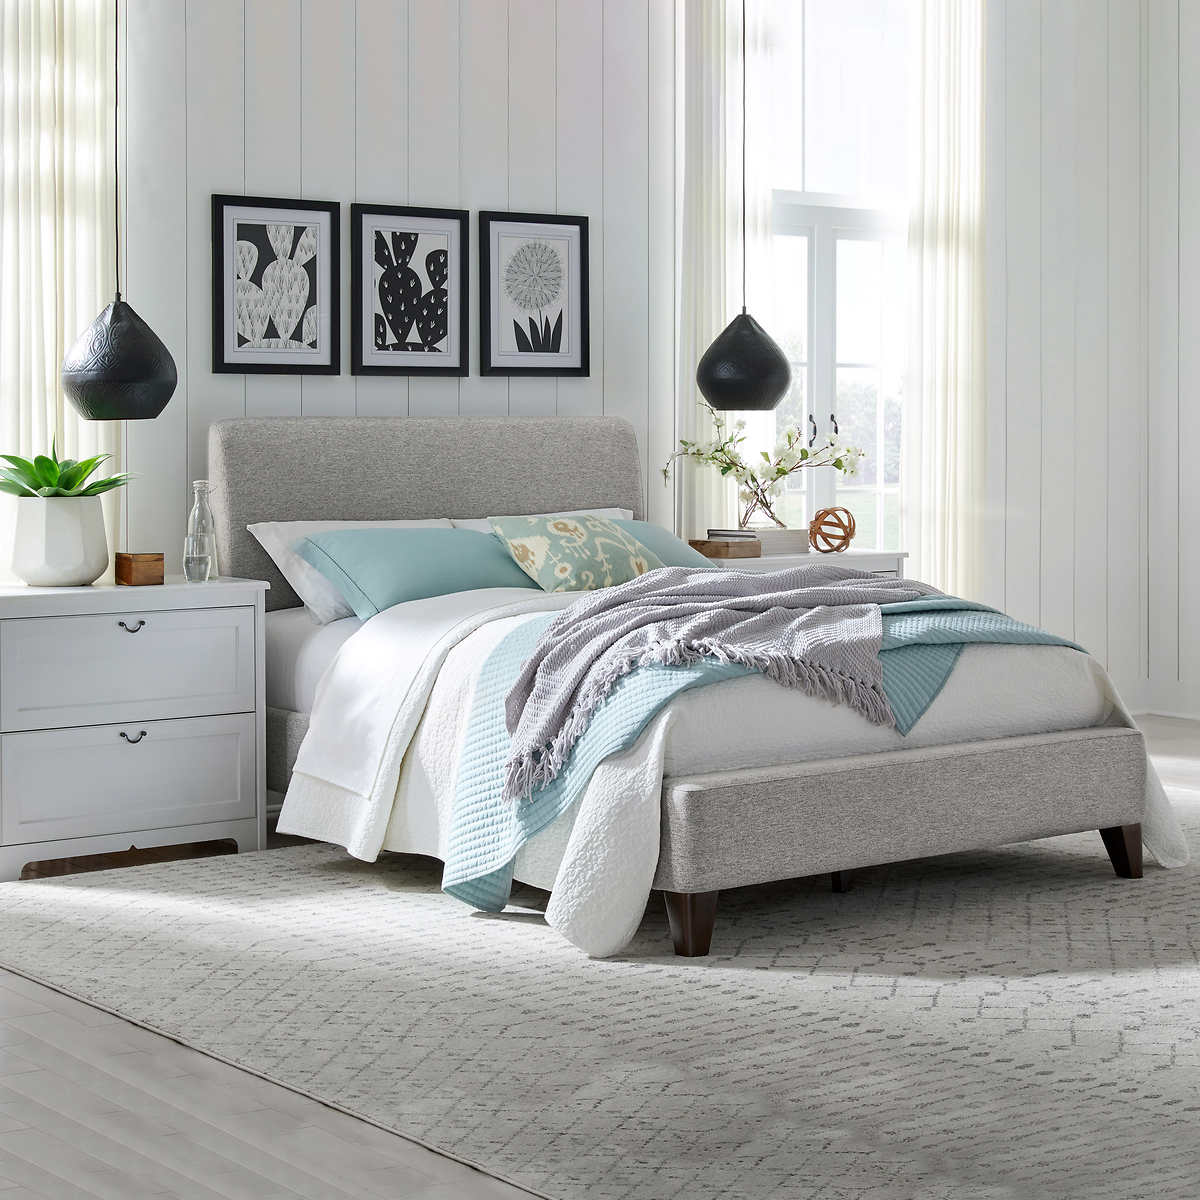 Cecelia Queen Upholstered Bed Costco, Grey Upholstered Headboard And Footboard